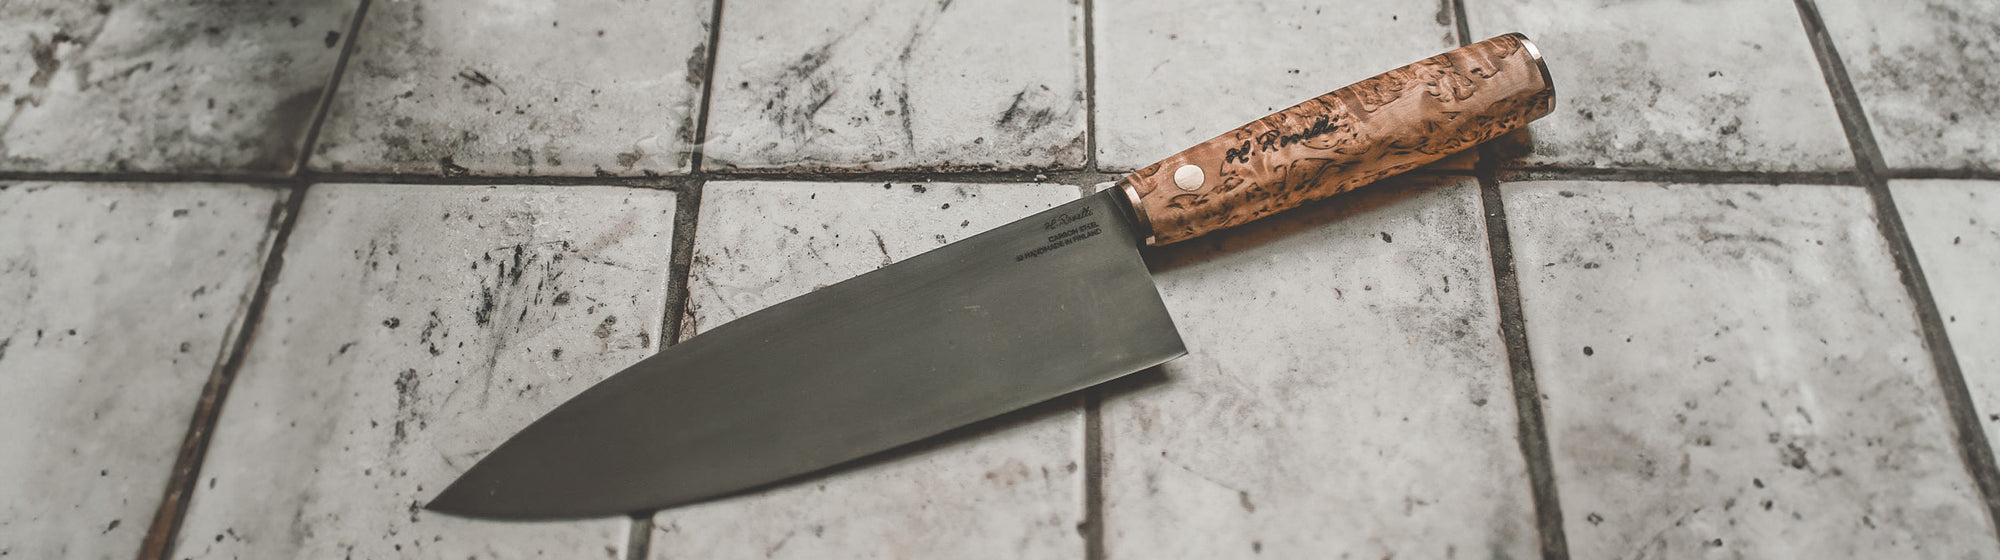 Chef knife in carbon steel and handle made out of curly birch handmade på Roselli 